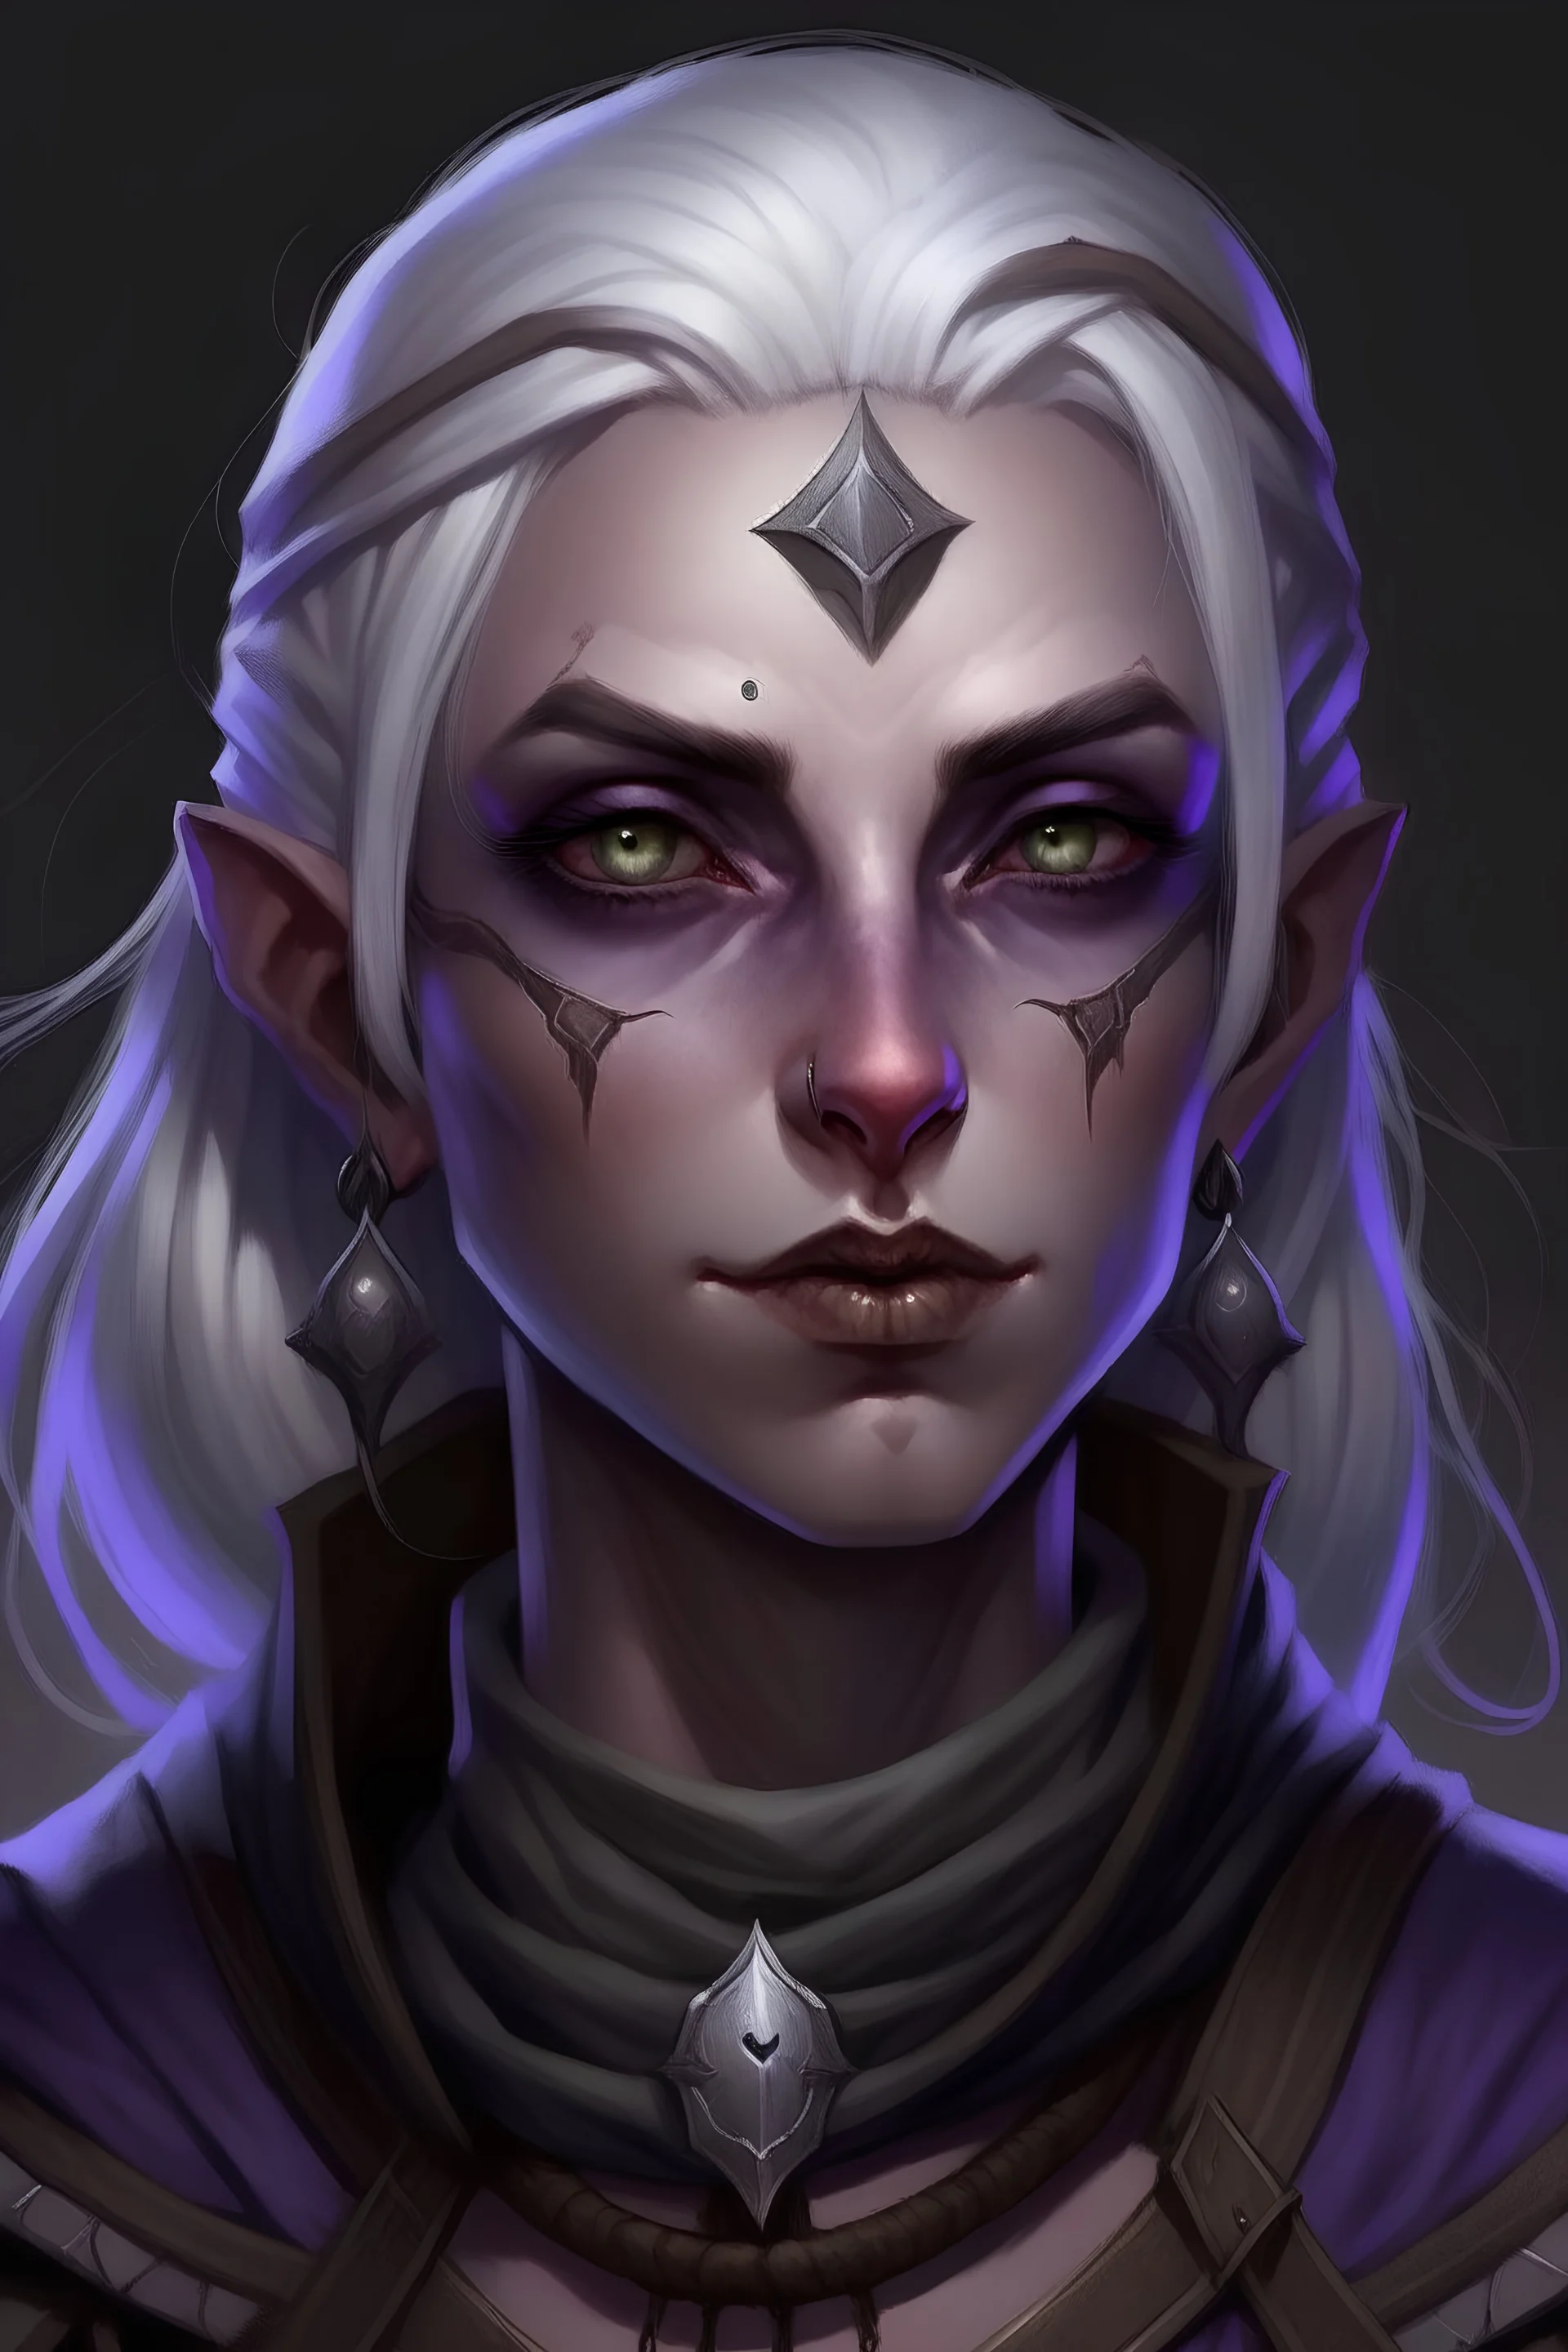 Dungeons and Dragons portrait of the face of a drow rogue wearing peasants clothes in the style of Emanuele Taglietti. She has purple eyes, pale armor, white hair, and is surrounded by moonlight. Has a playful demeanor, looks to be in her early twenties. She is not wearing any facial jewelry. No jewelry or gems on her face. no markings on her face.